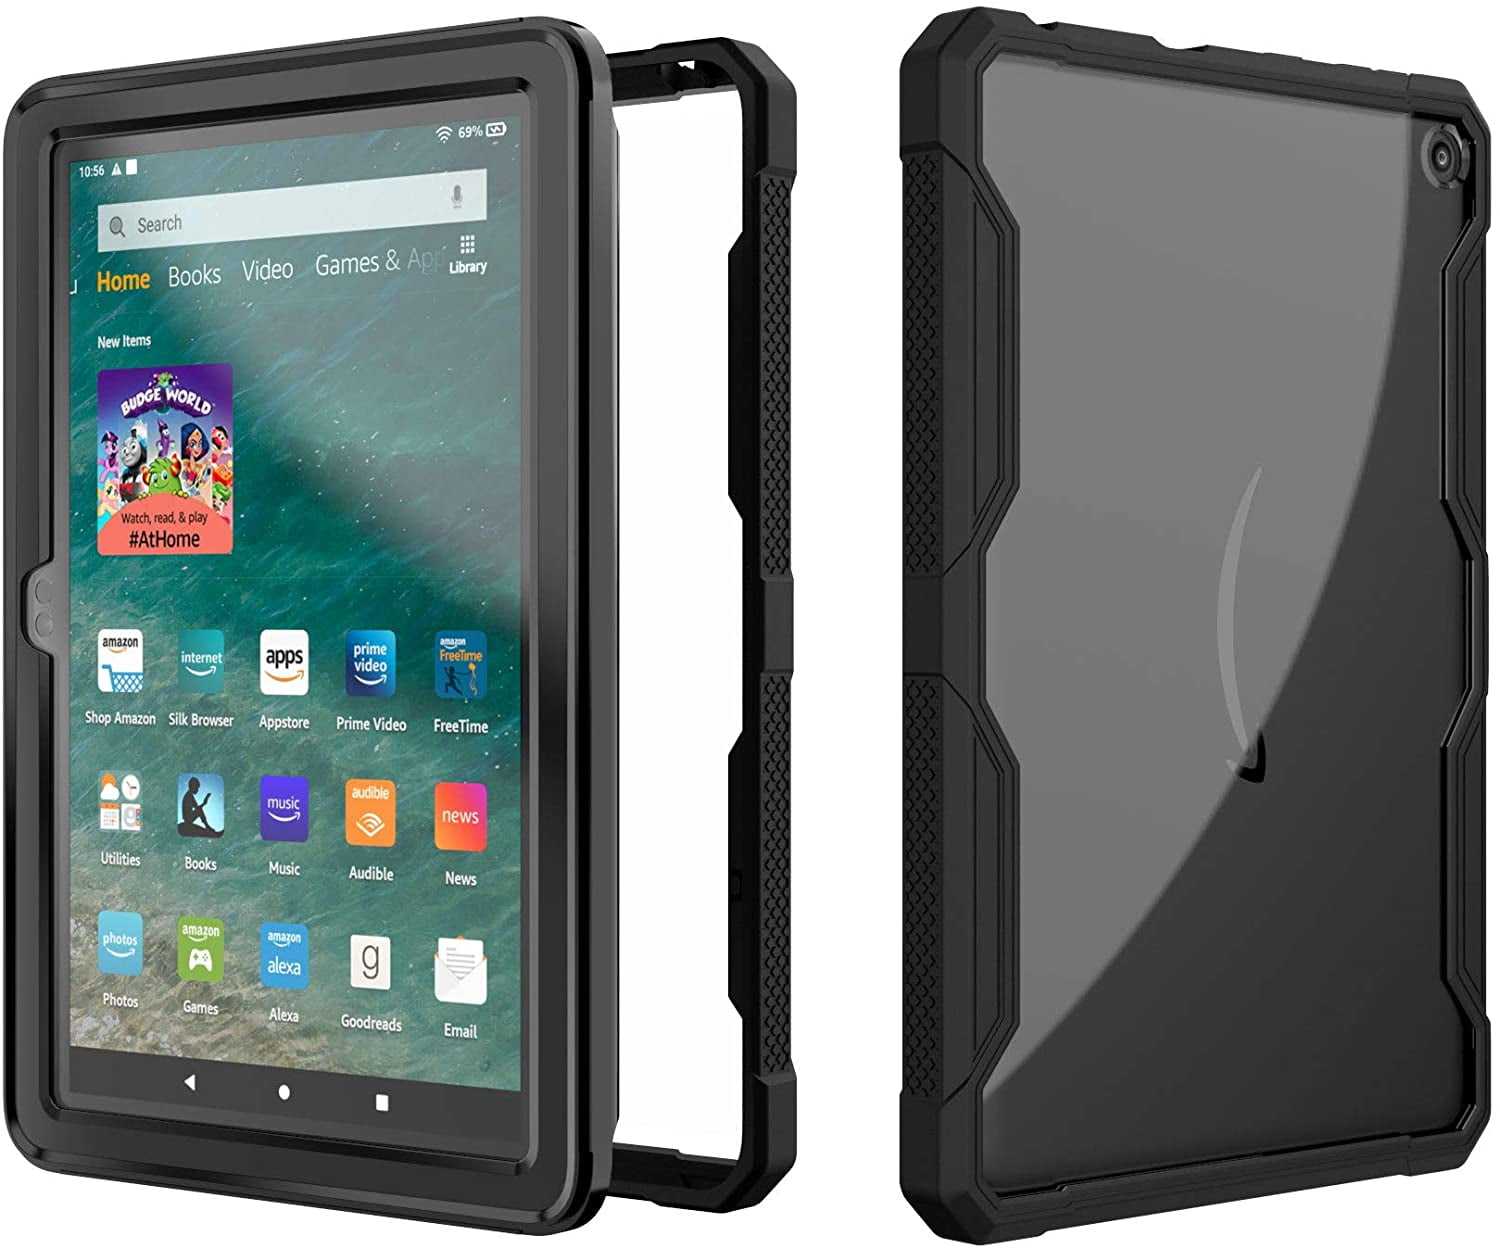 EpicGadget Case for Amazon Fire HD 8 / Fire HD 8 Plus (10th Generation